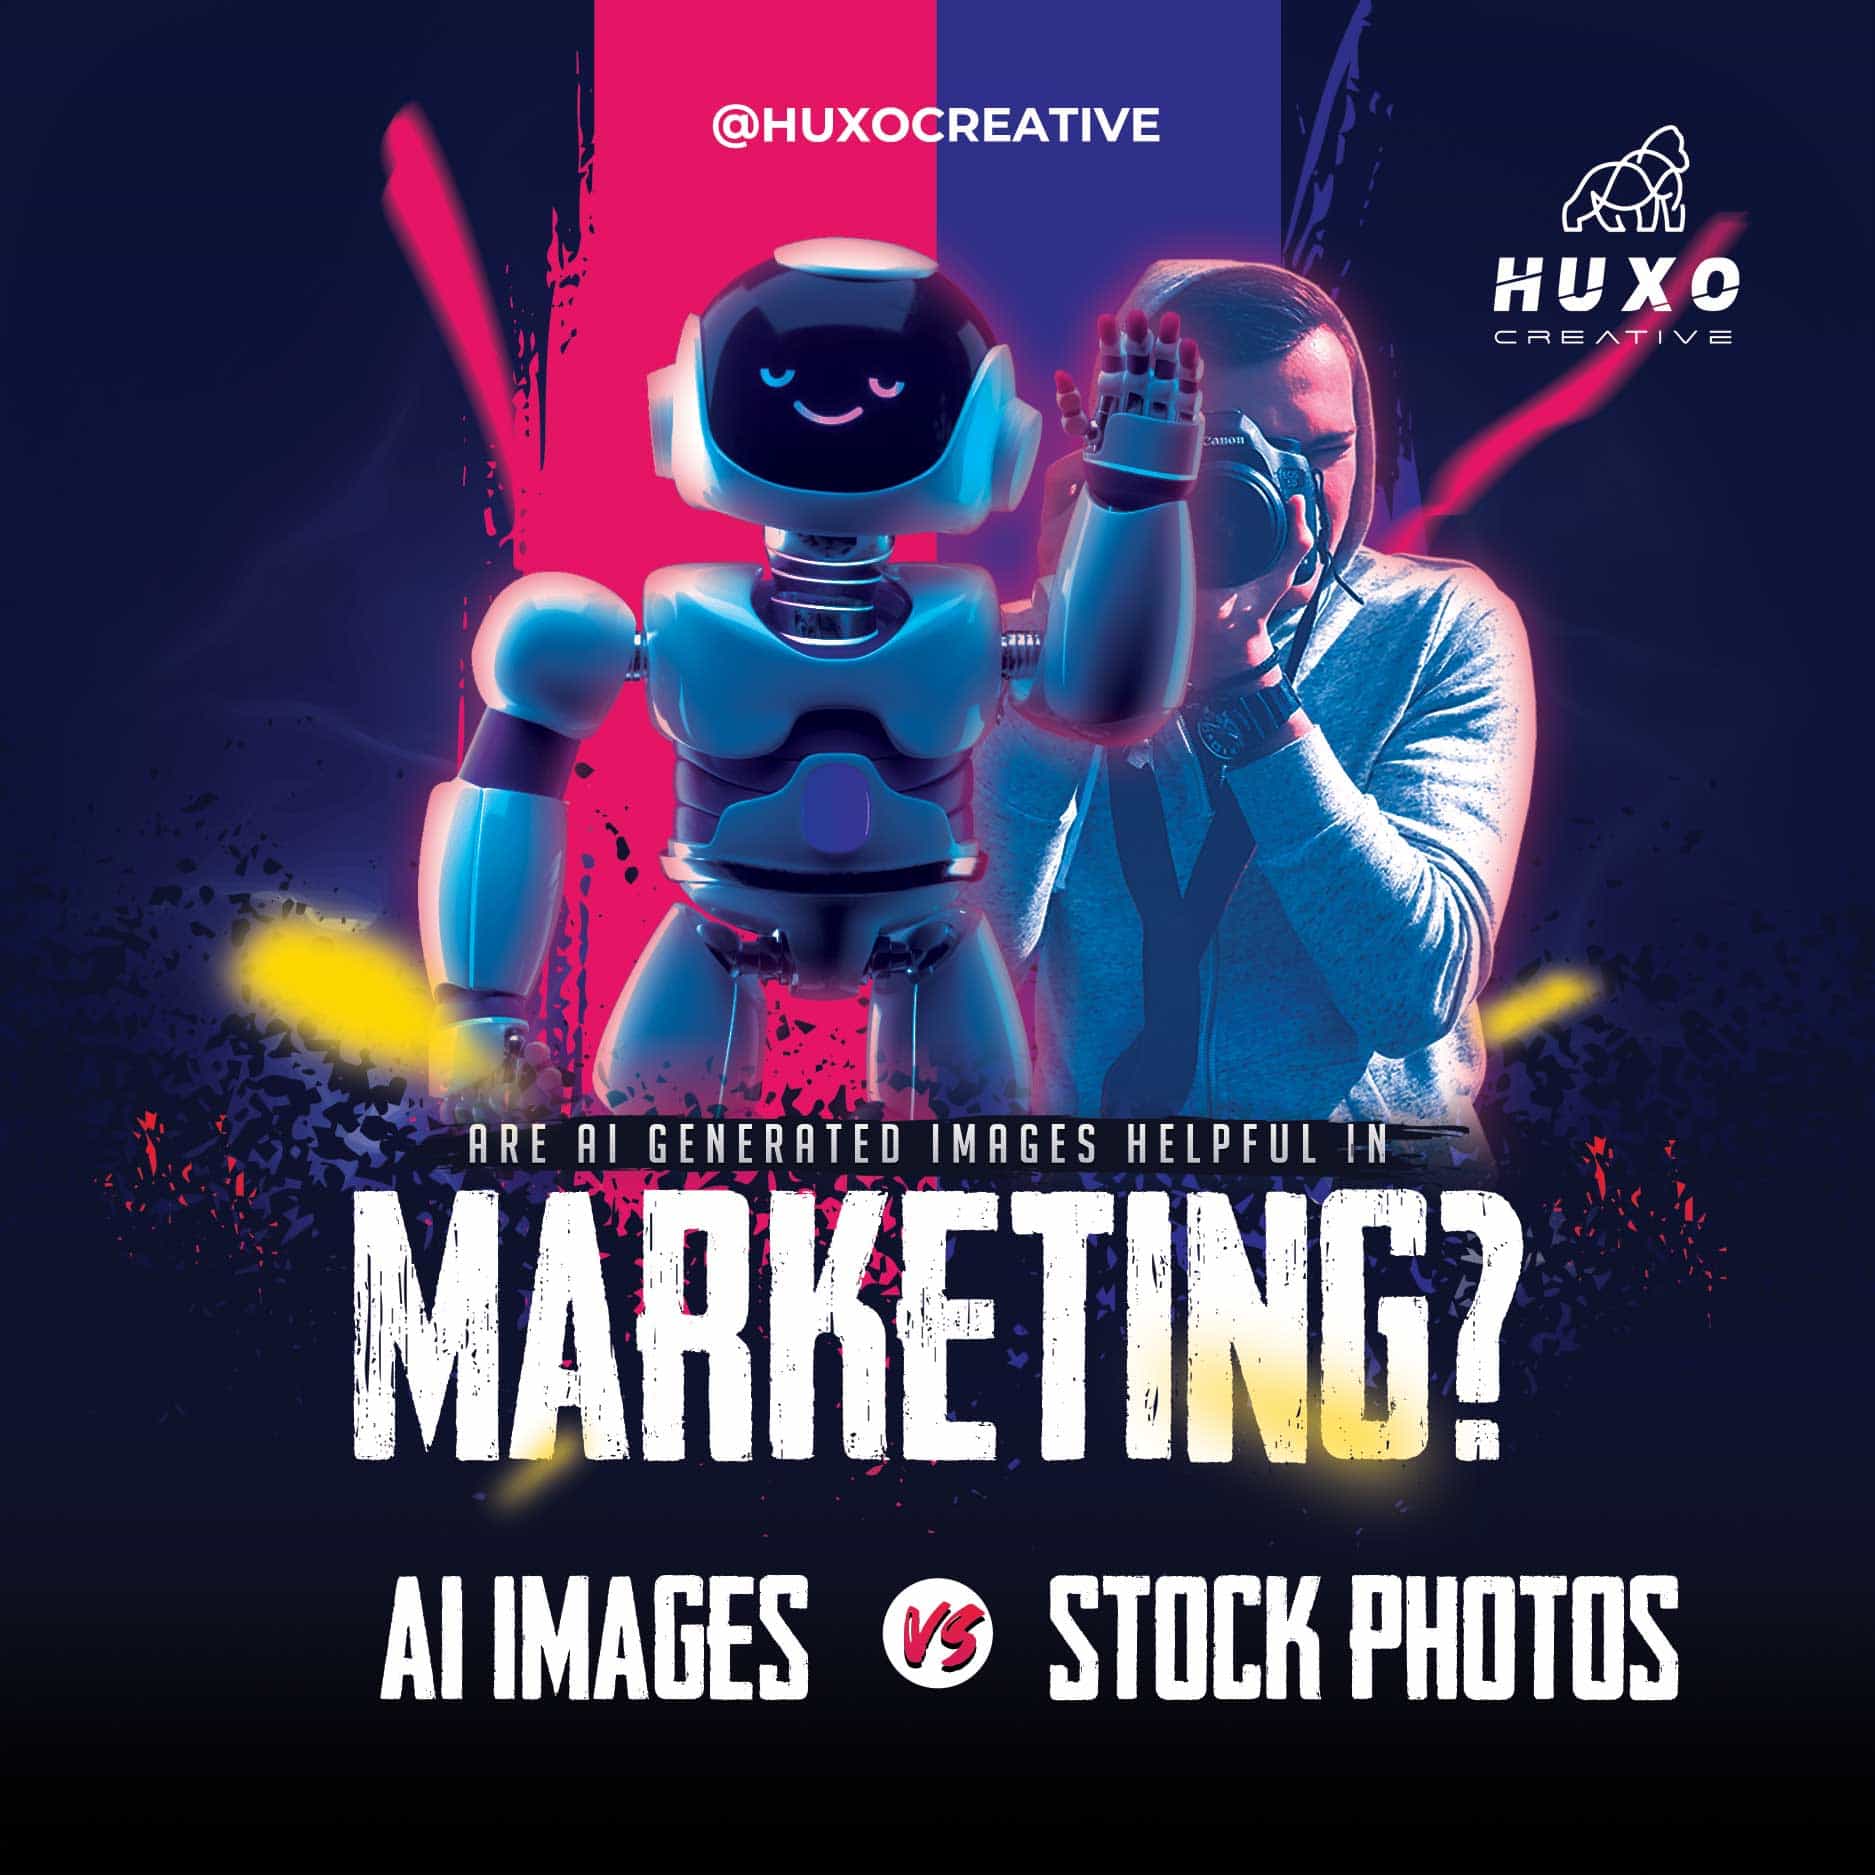 Are AI Images Helpful in Marketing? Stock Photos vs AI Images